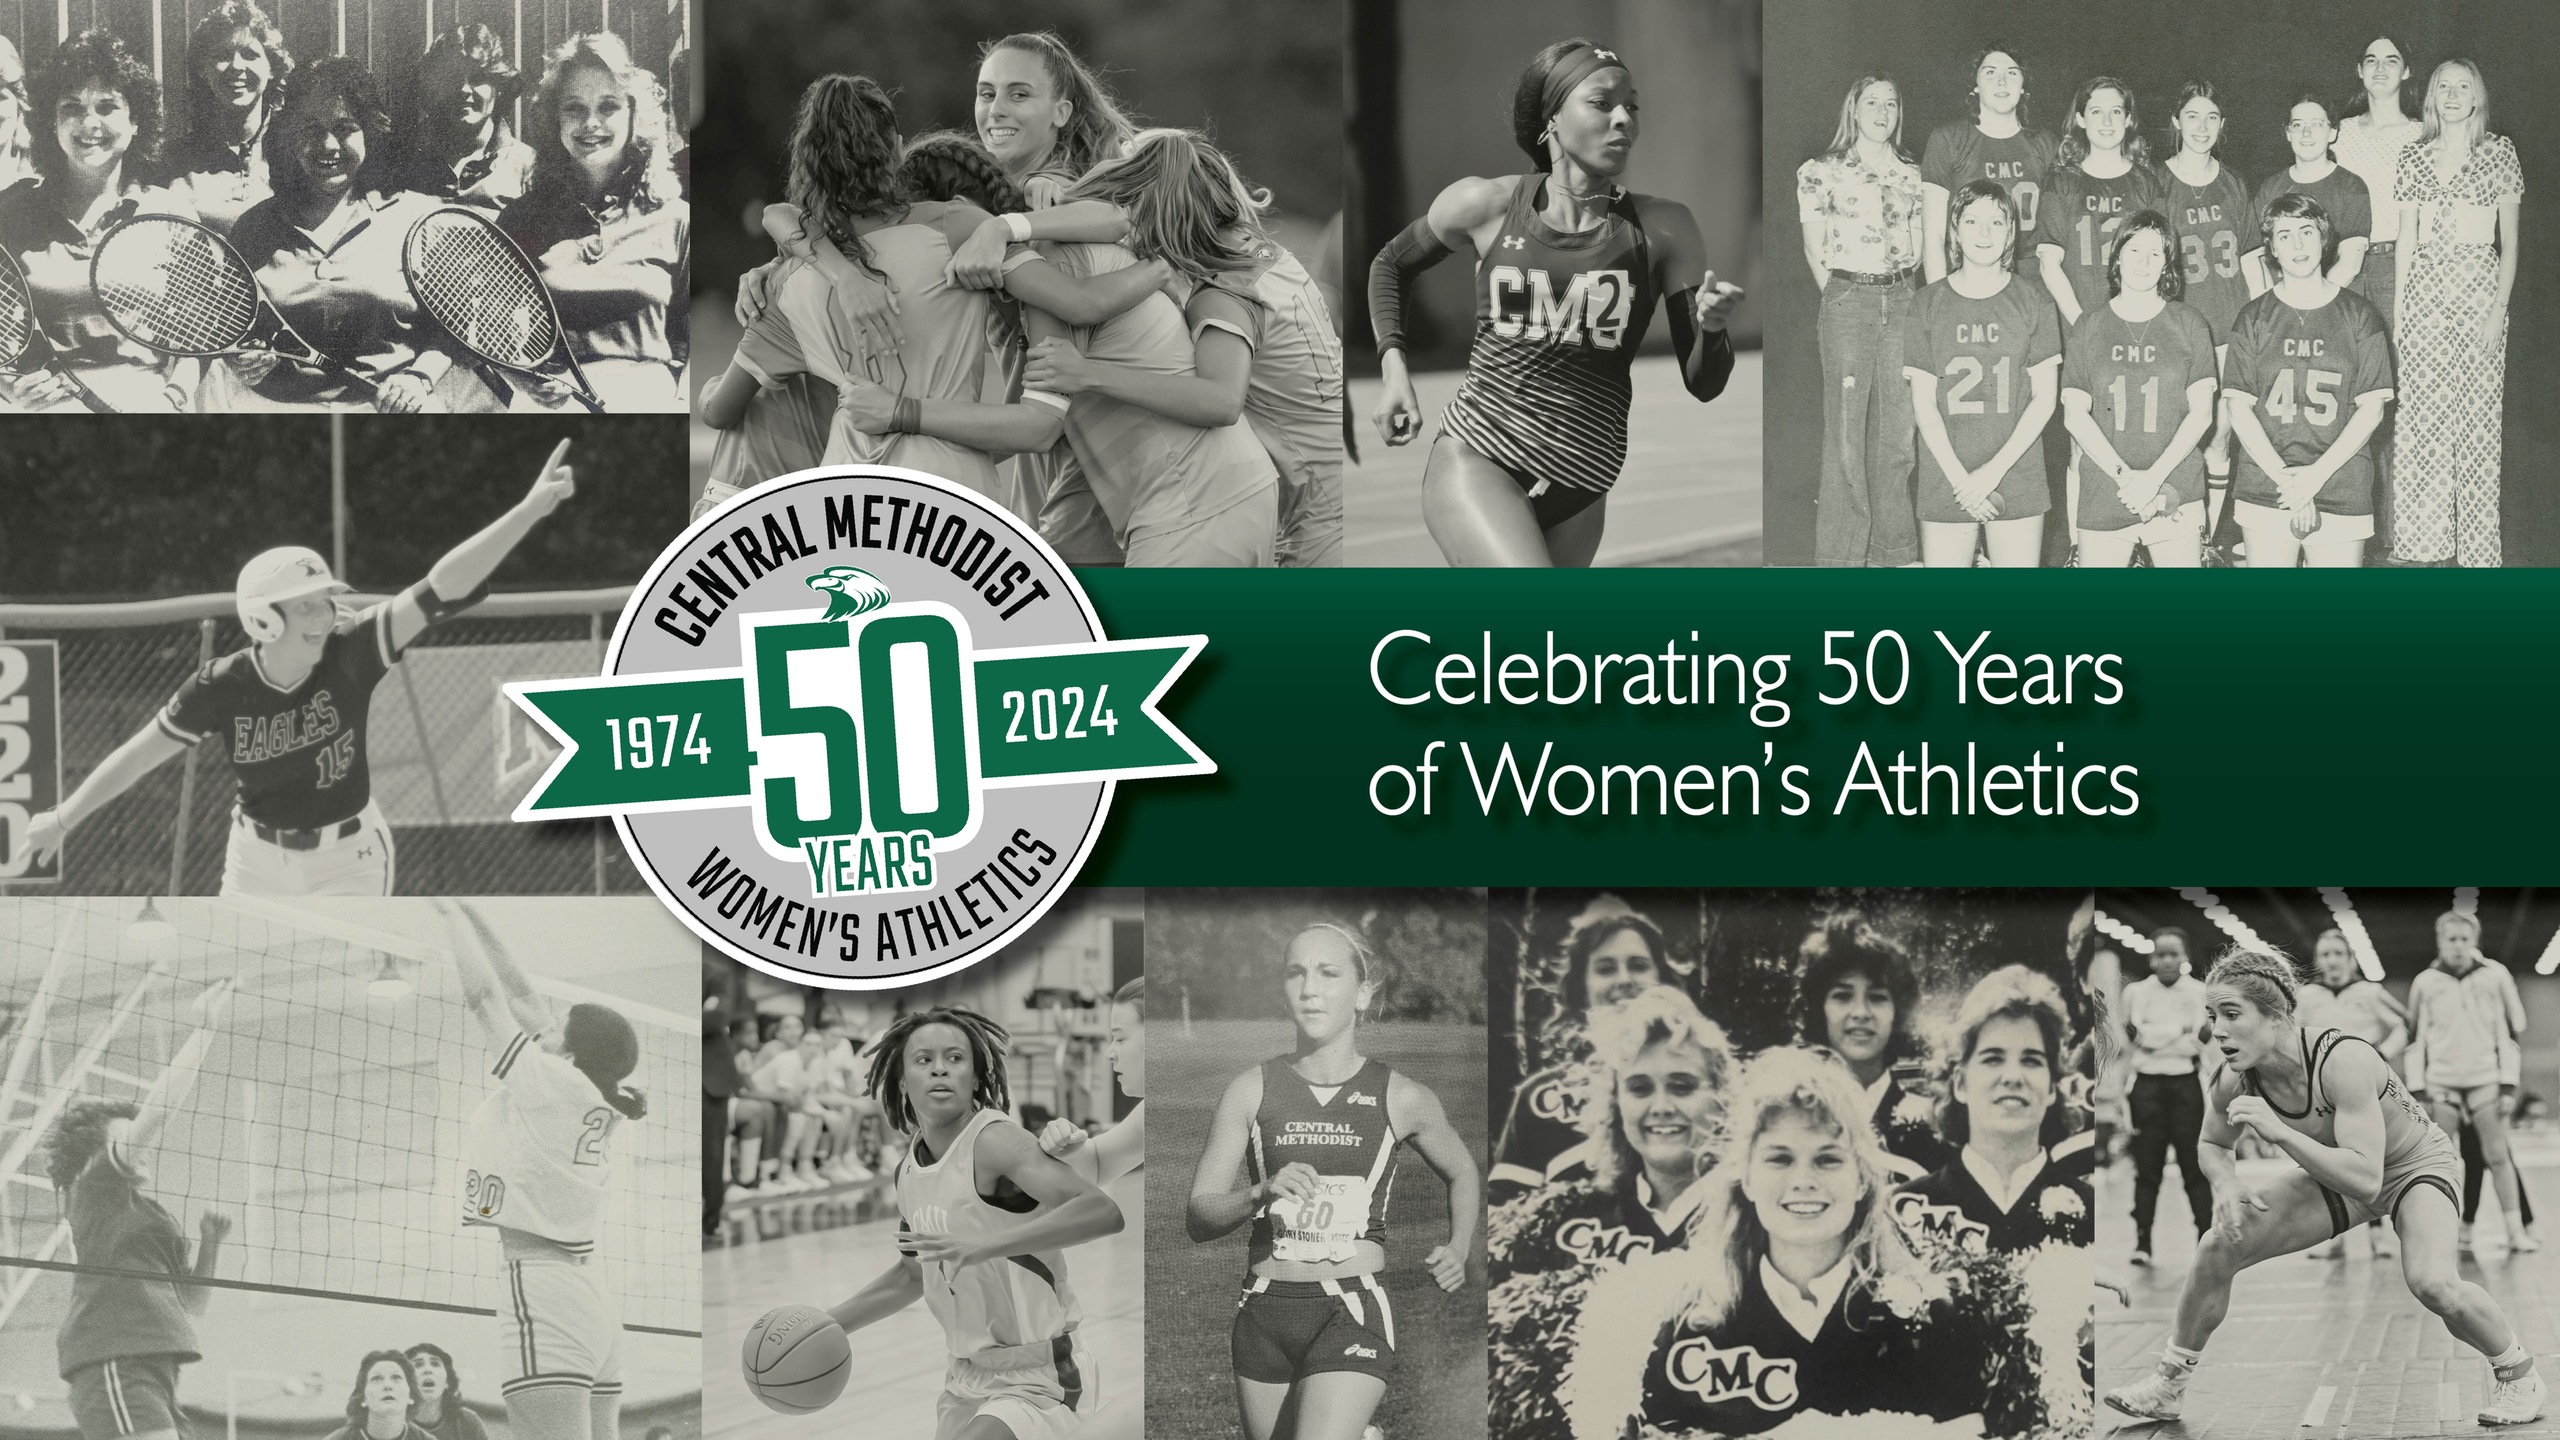 Central Methodist To Celebrate 50 Years of Women's Athletics